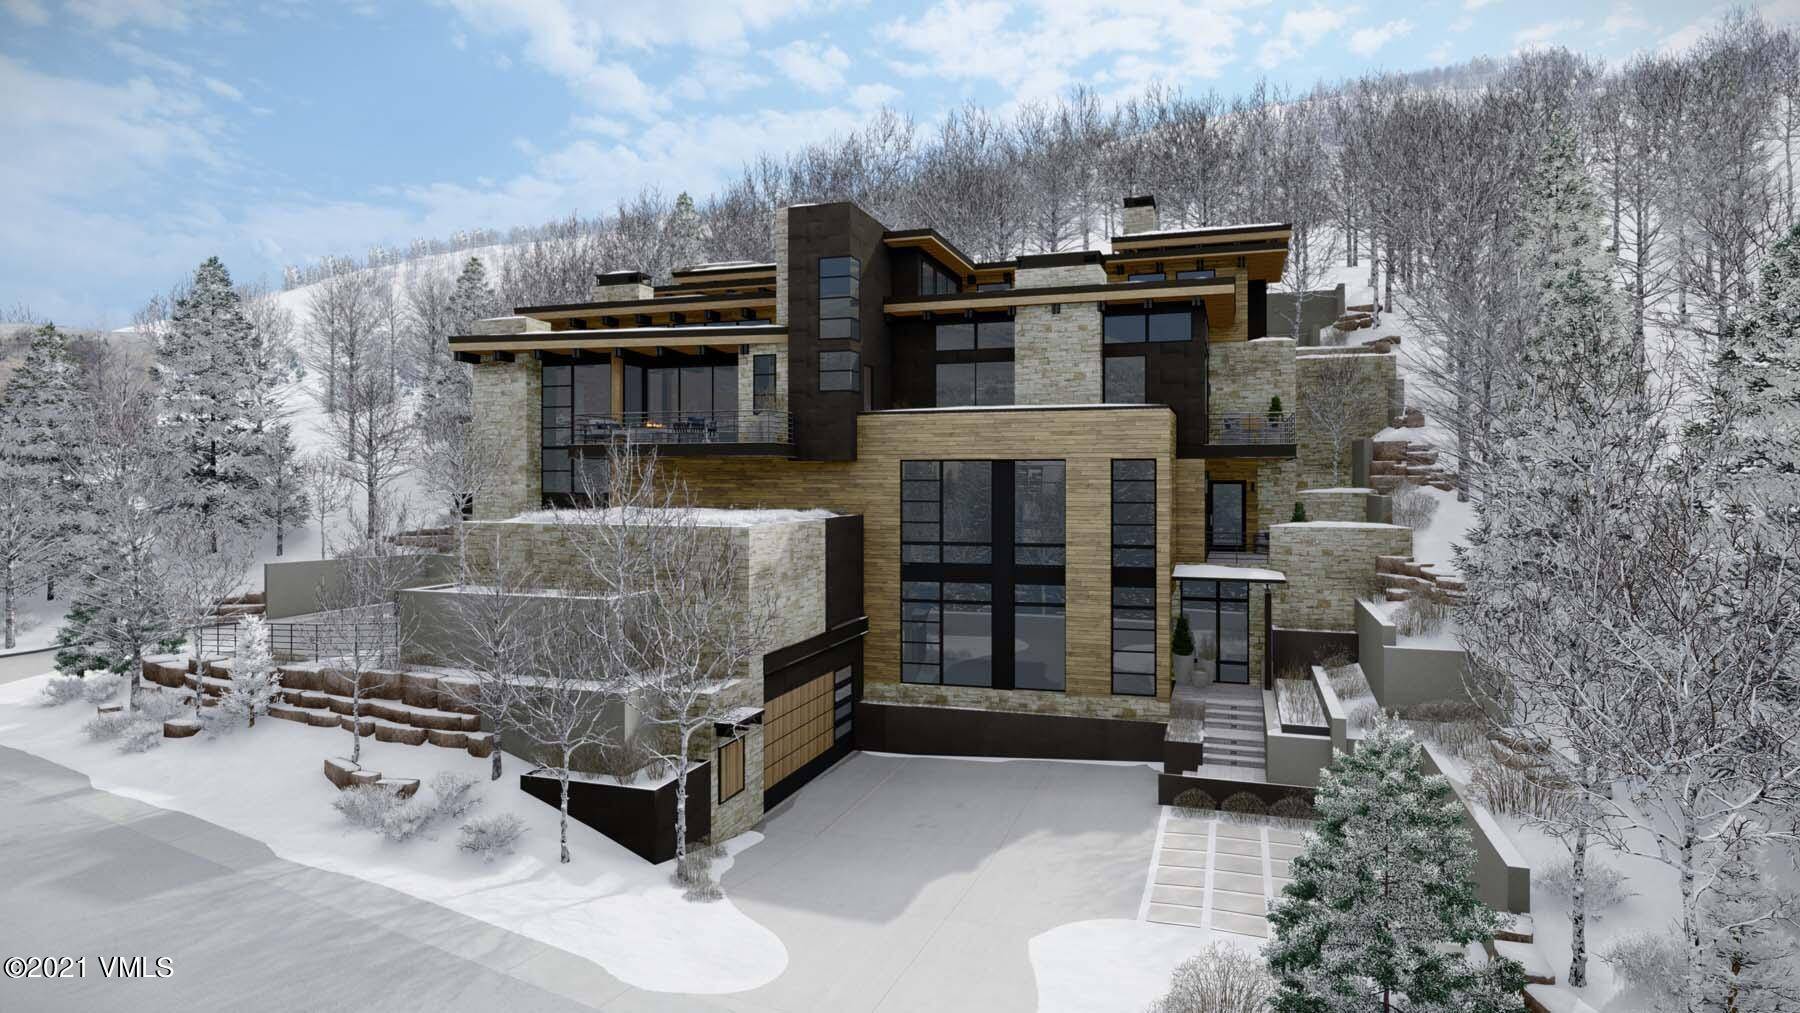 Rare opportunity to own a new construction, mountain contemporary home on the highly coveted Forest Road in Vail.